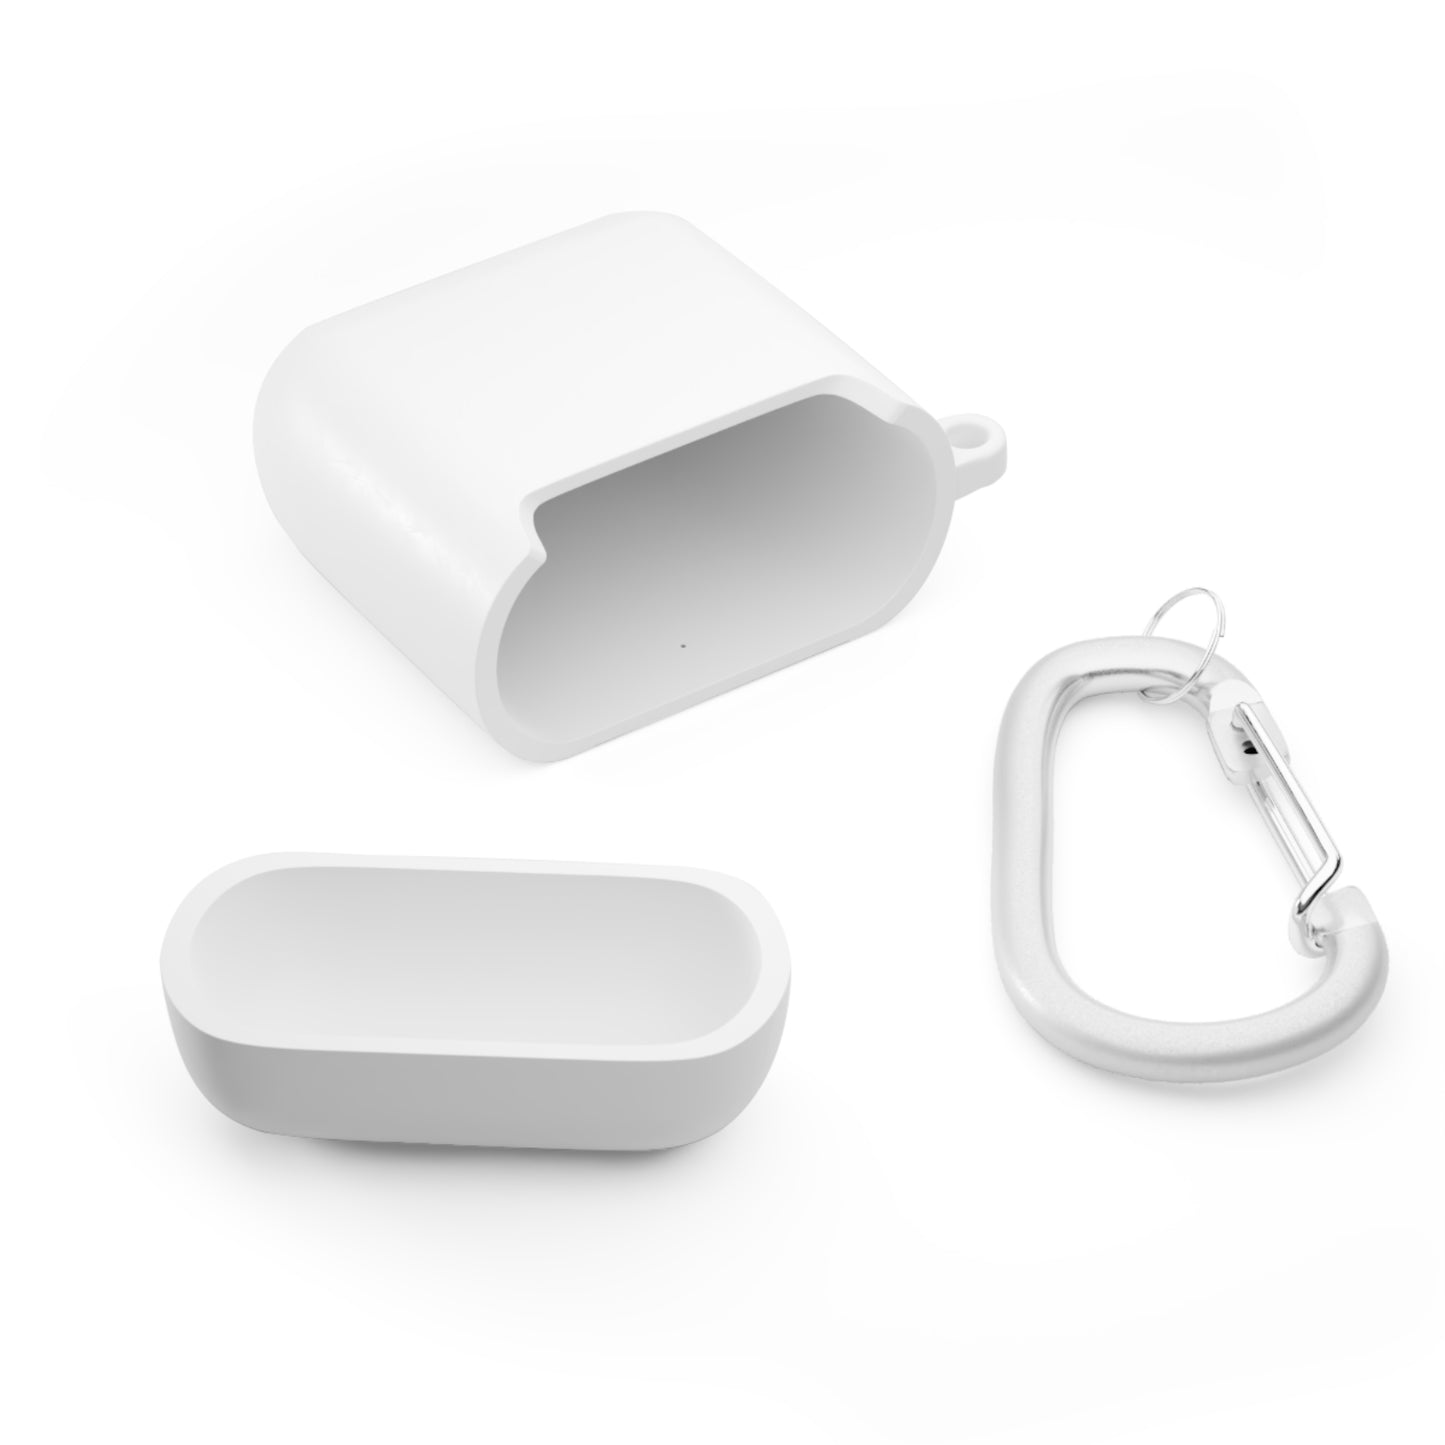 God Never Failed Me Yet Airpod / Airpods Pro Case cover